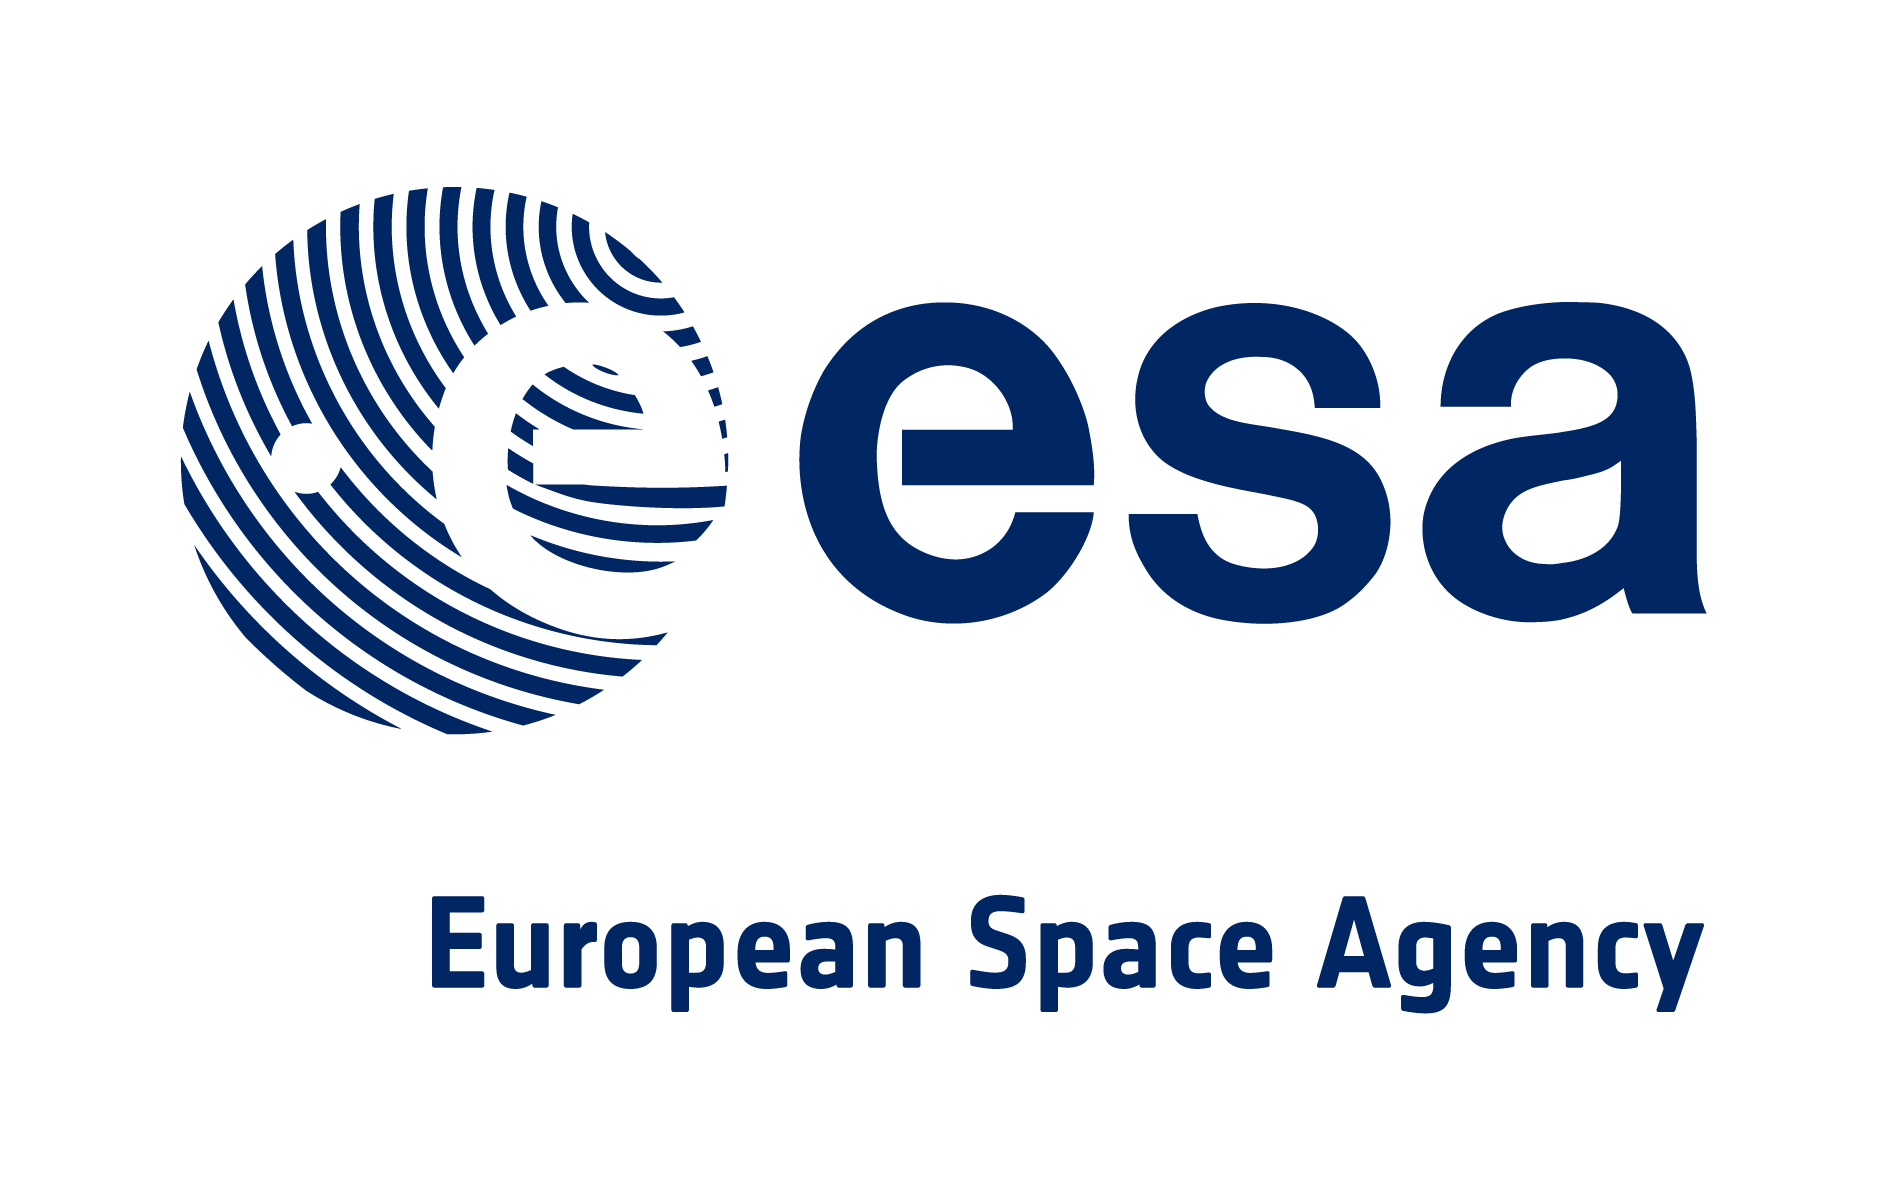 We presented at the ESA – Colour and Light in the Ocean symposium 2016